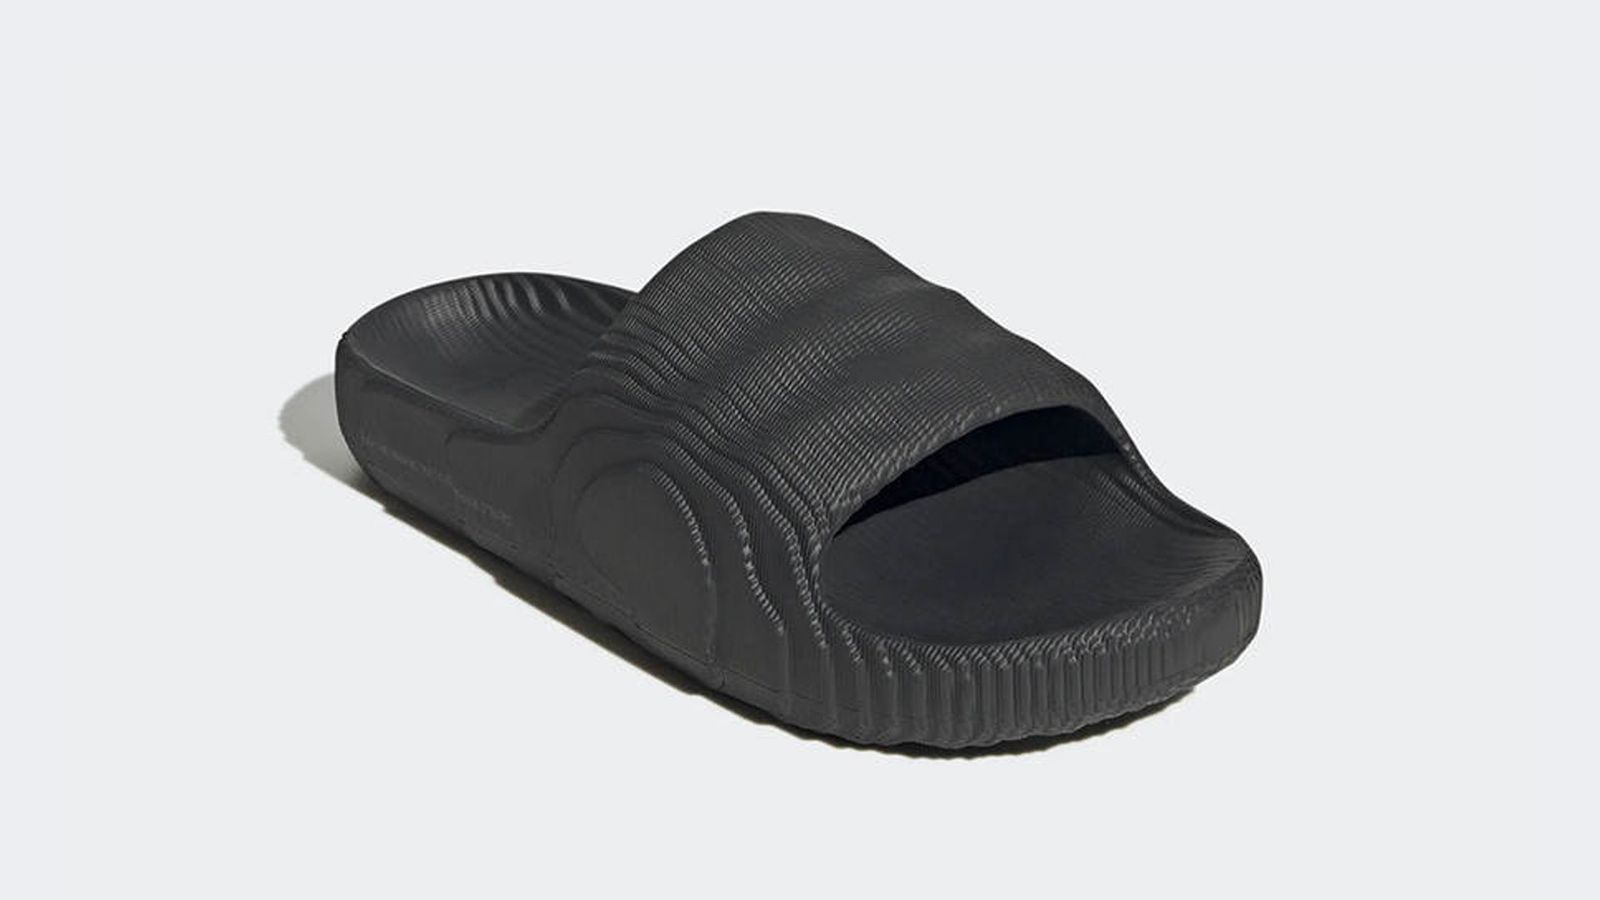 adidas Adilette 22 Slides product image of an all-black slider with a wavey, grooved pattern over the top.